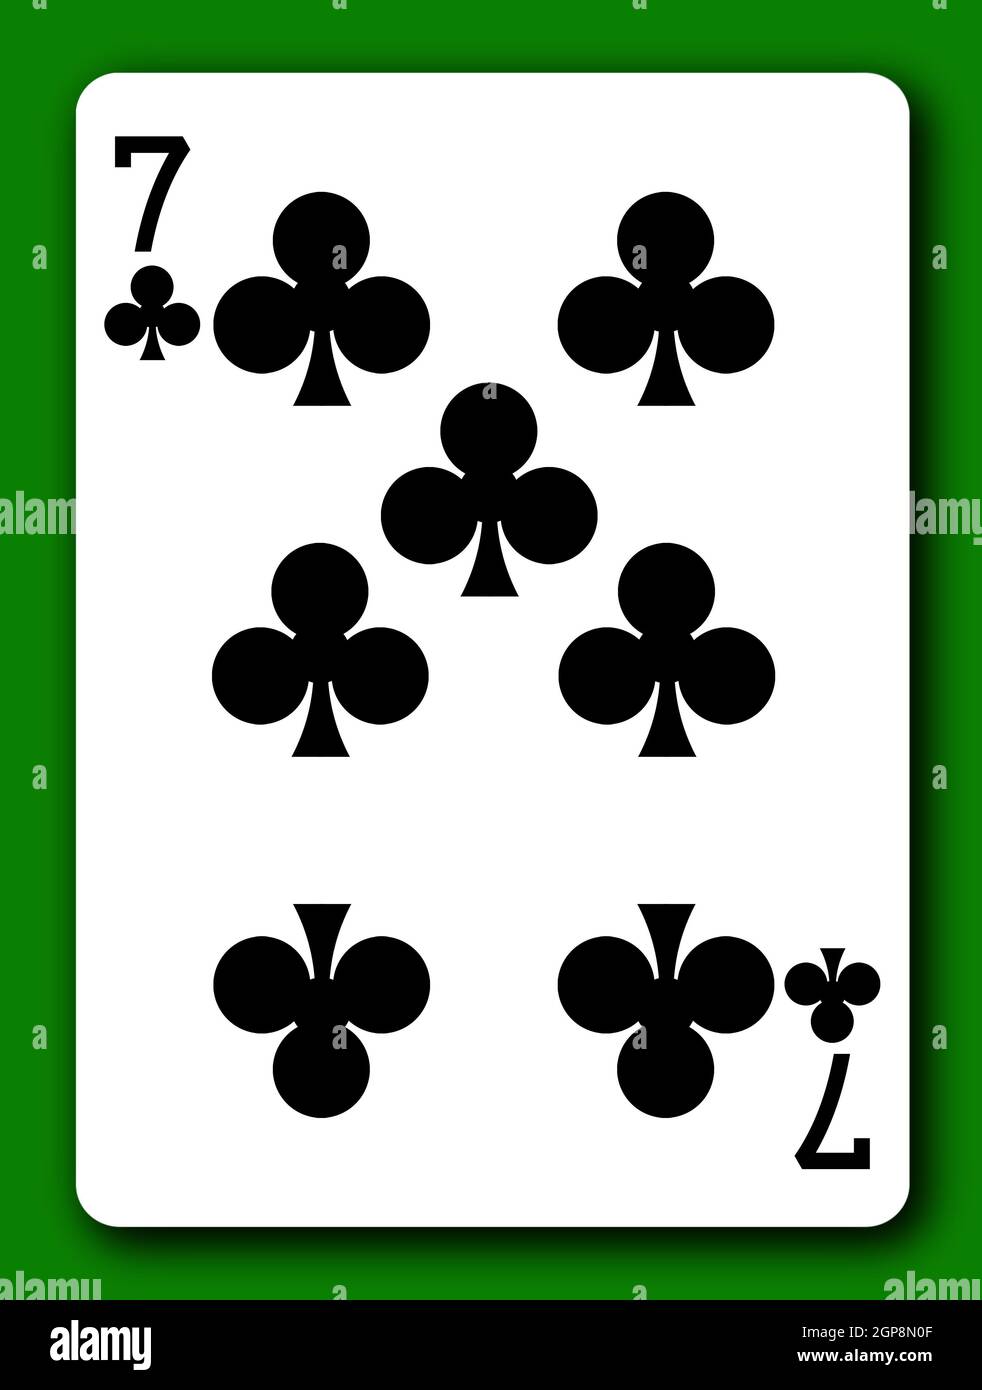 A 7 Seven of Clubs playing card with clipping path to remove background and shadow 3d illustration Stock Photo